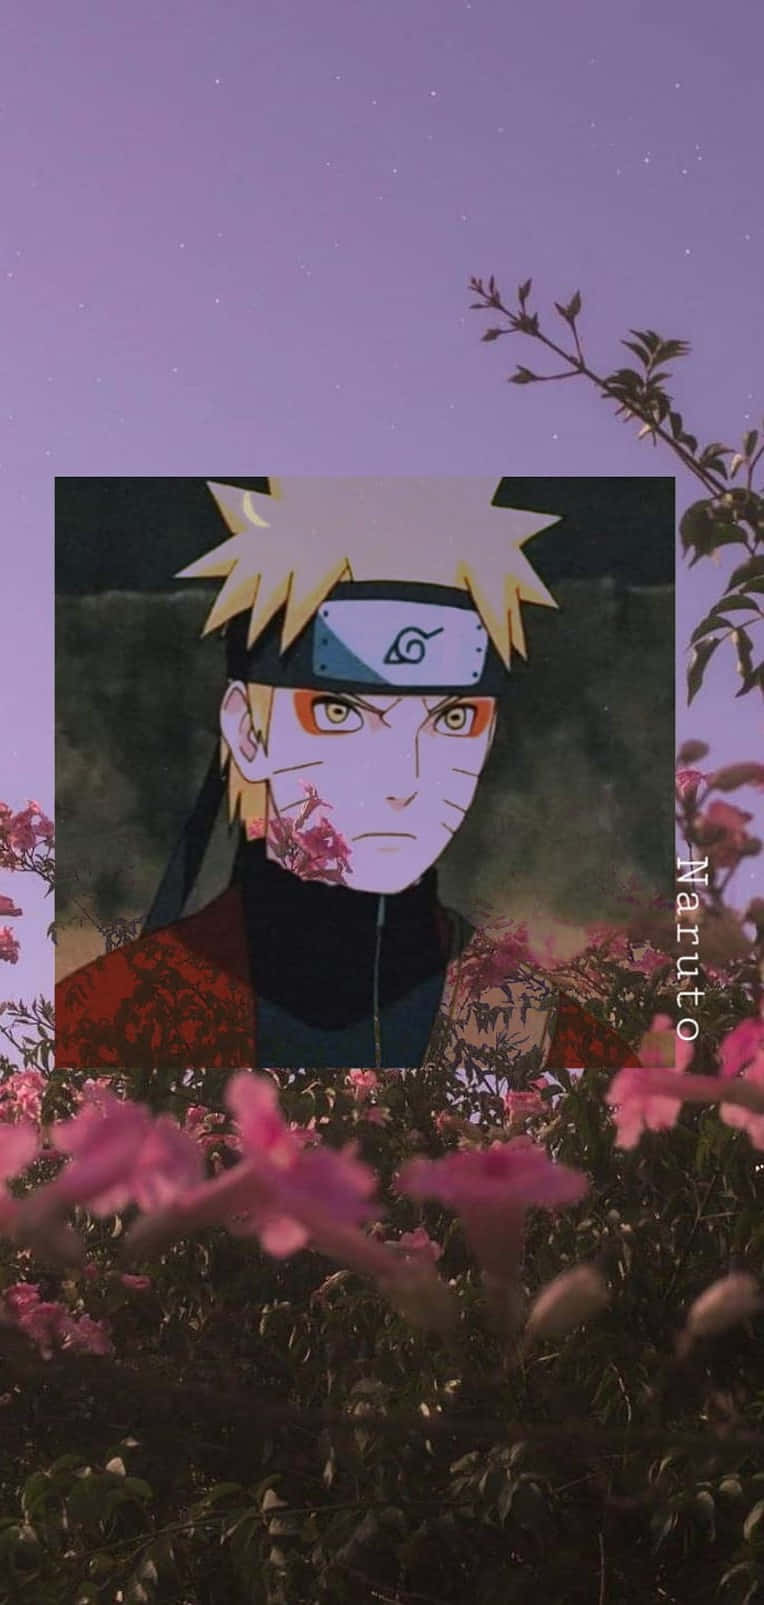 Sporting An Aesthetic Naruto Phone For The Win! Wallpaper